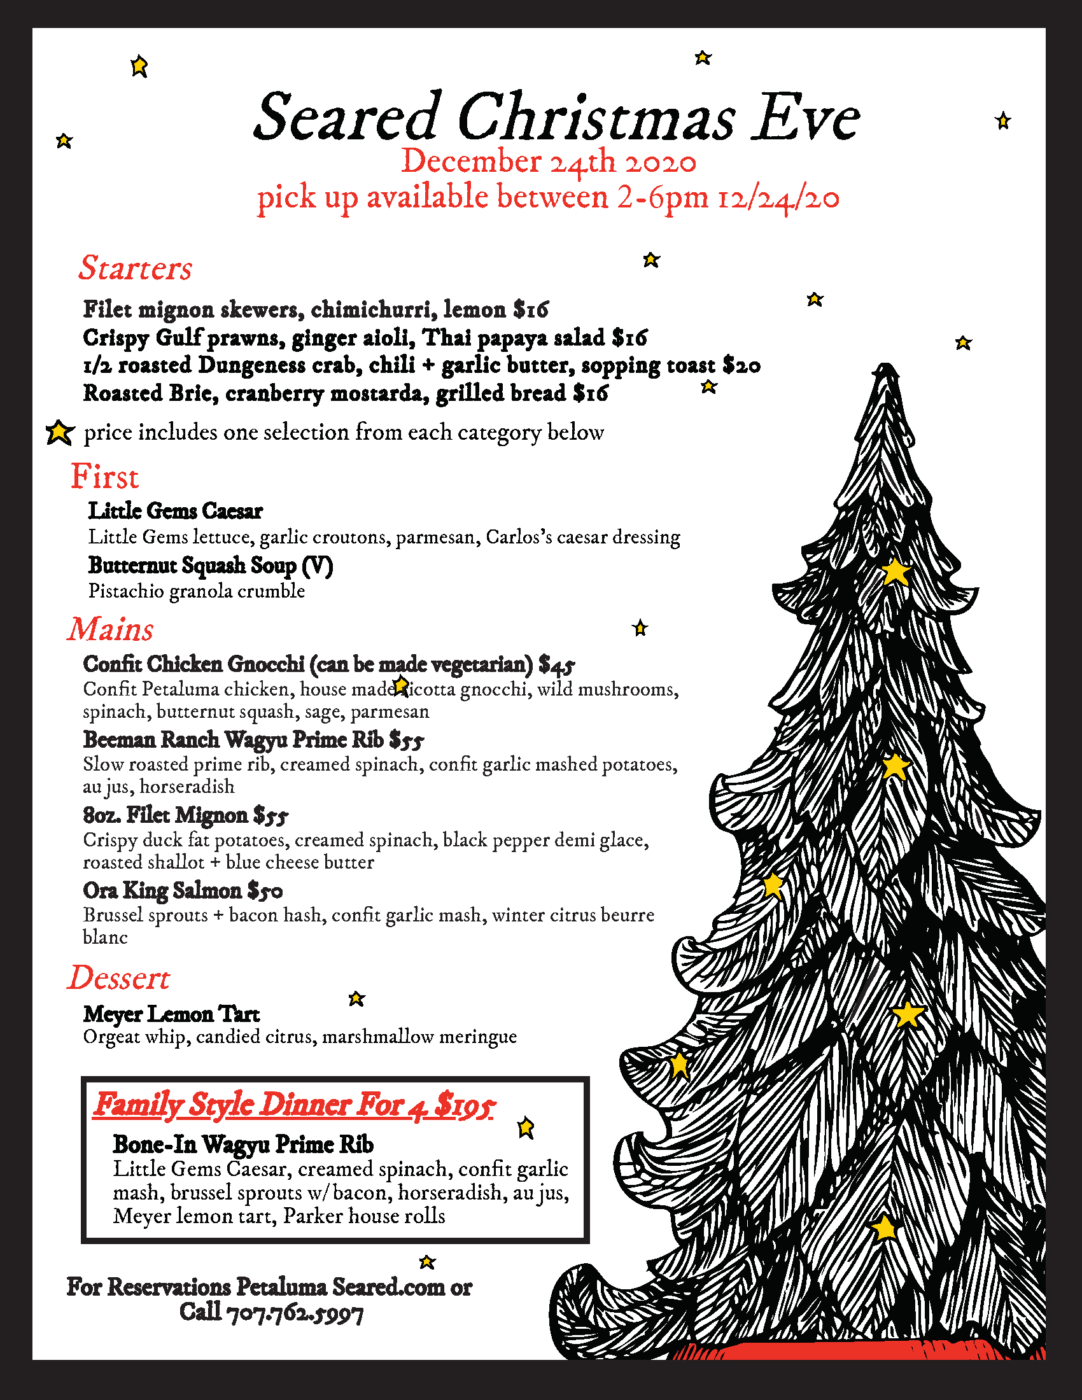 Christmas Eve Dinner To-Go menu from seared